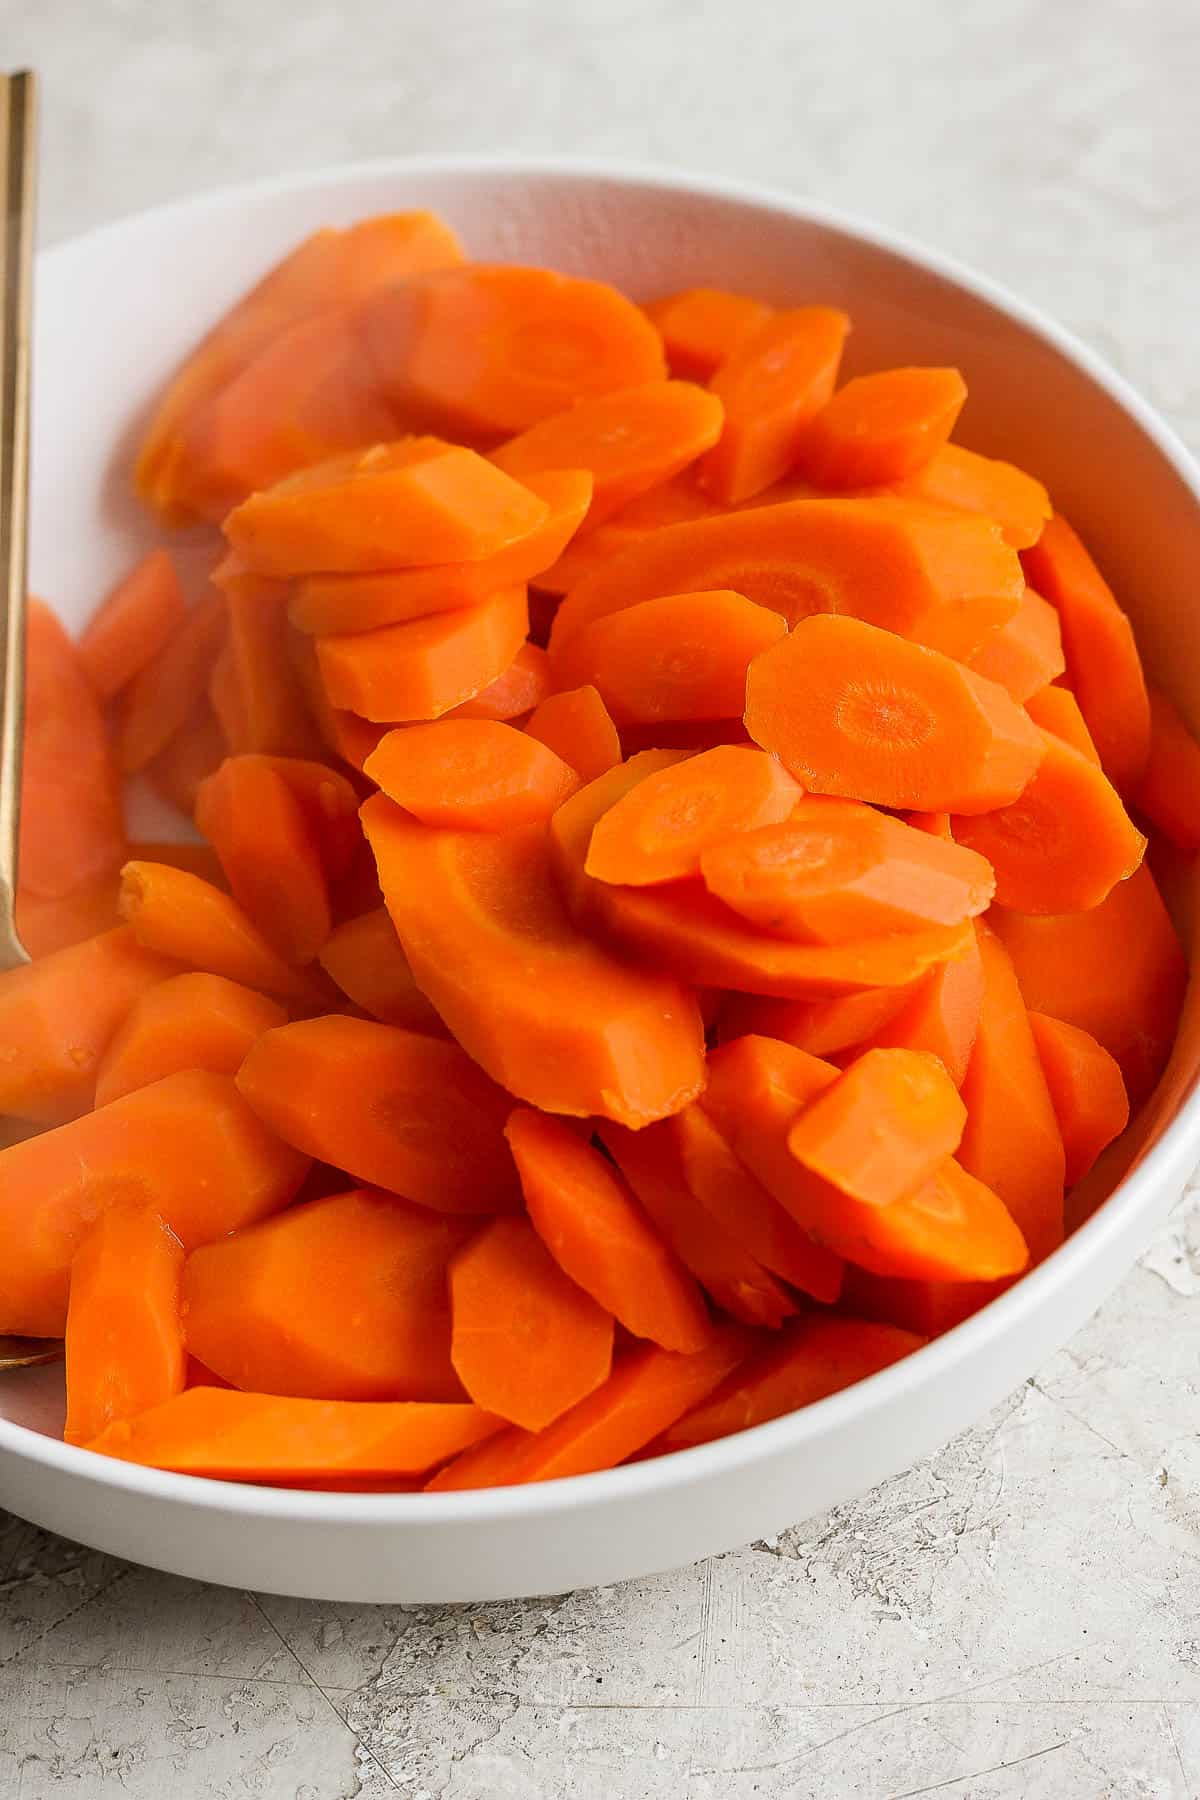 Boiled carrots in a white bowl.